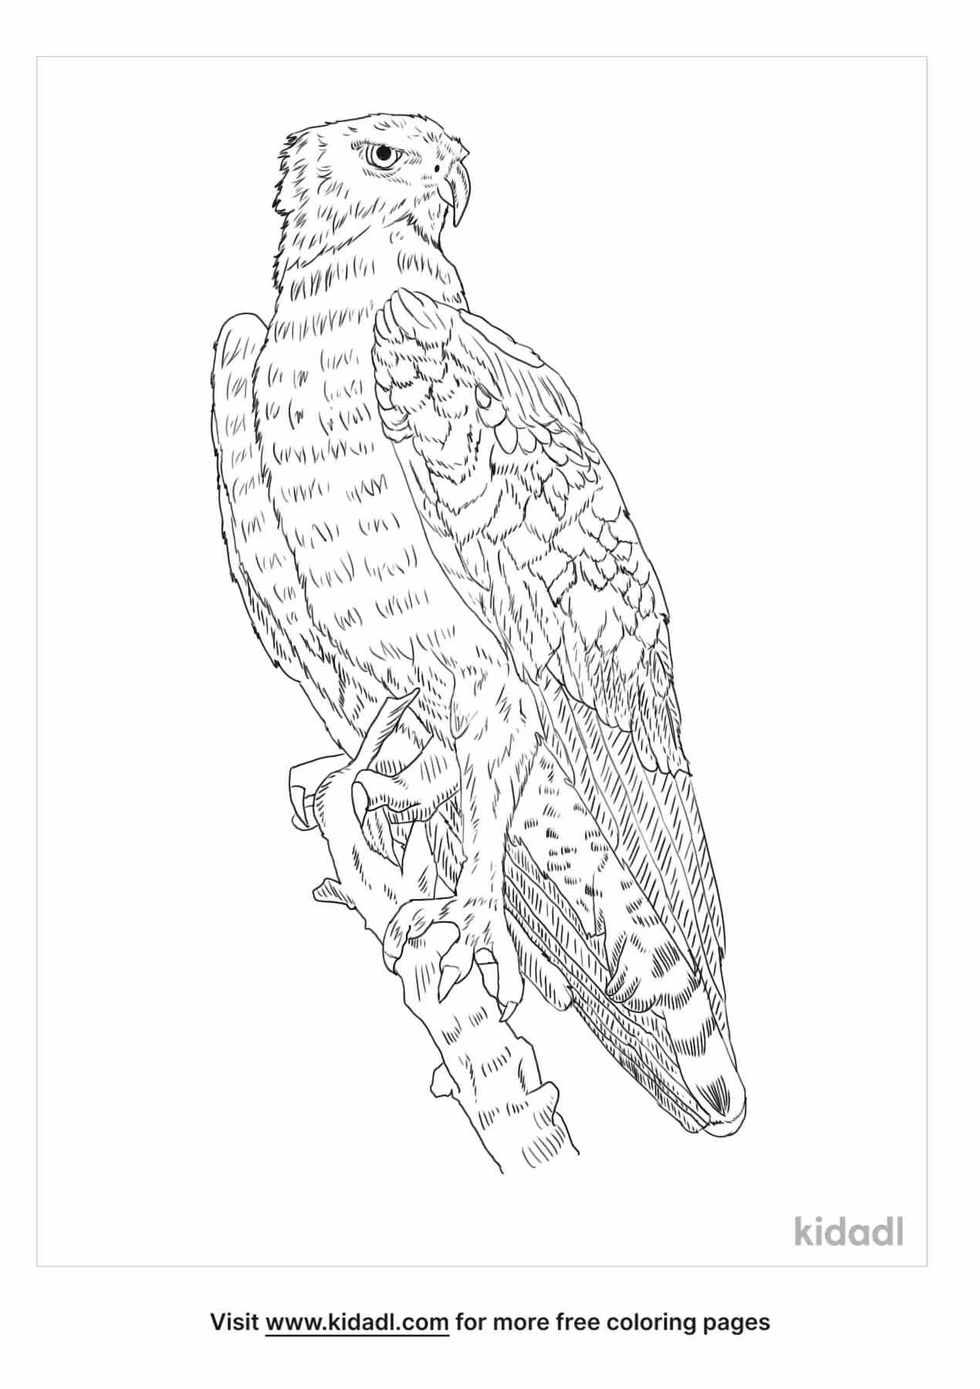 Fun martial eagle coloring page for kids.